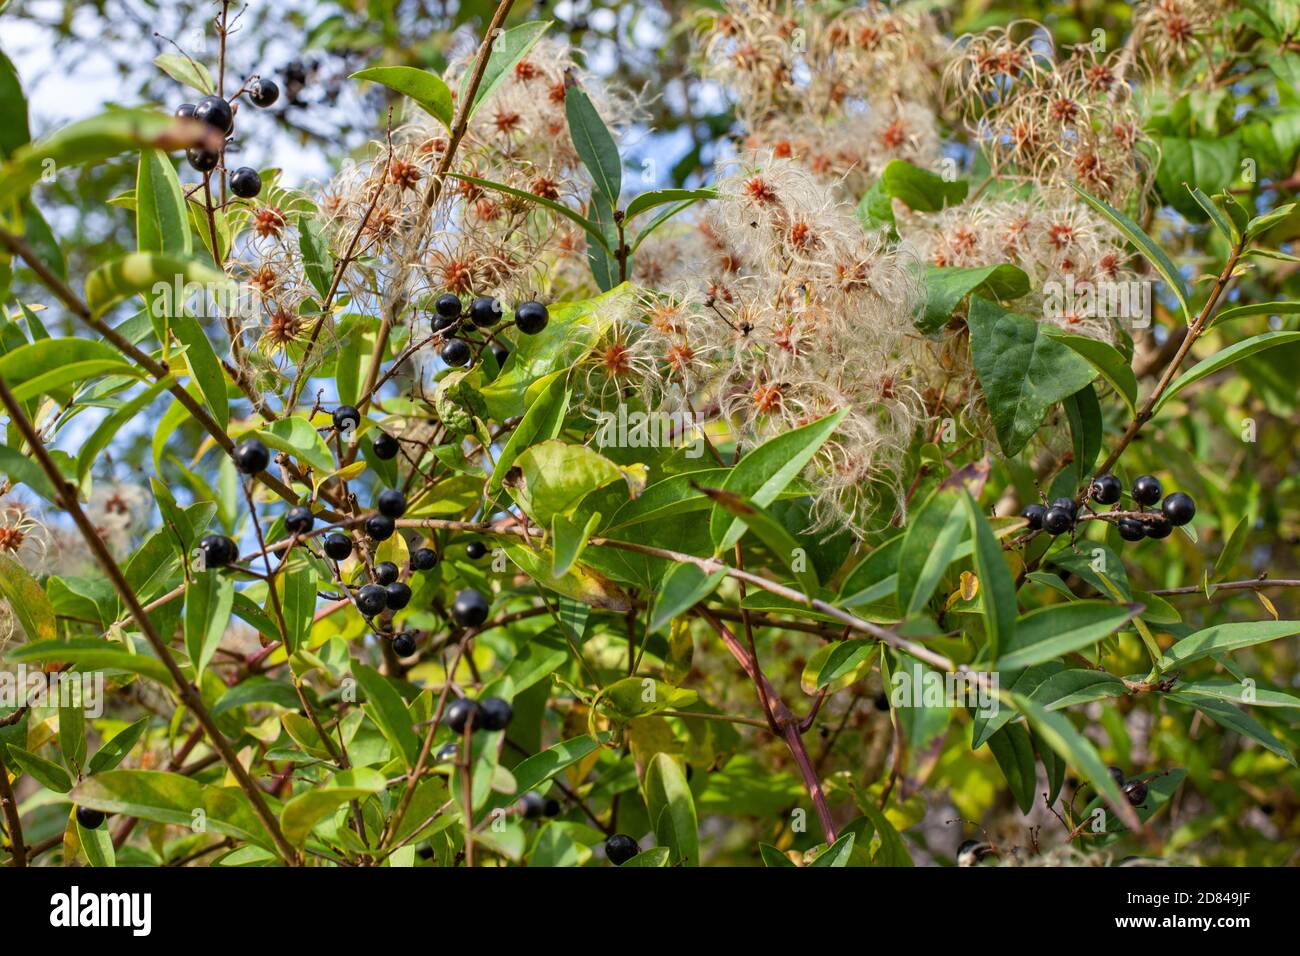 Black berries and fluffy seeds grow on bushes in the German countryside in Potsdam, Germany Stock Photo